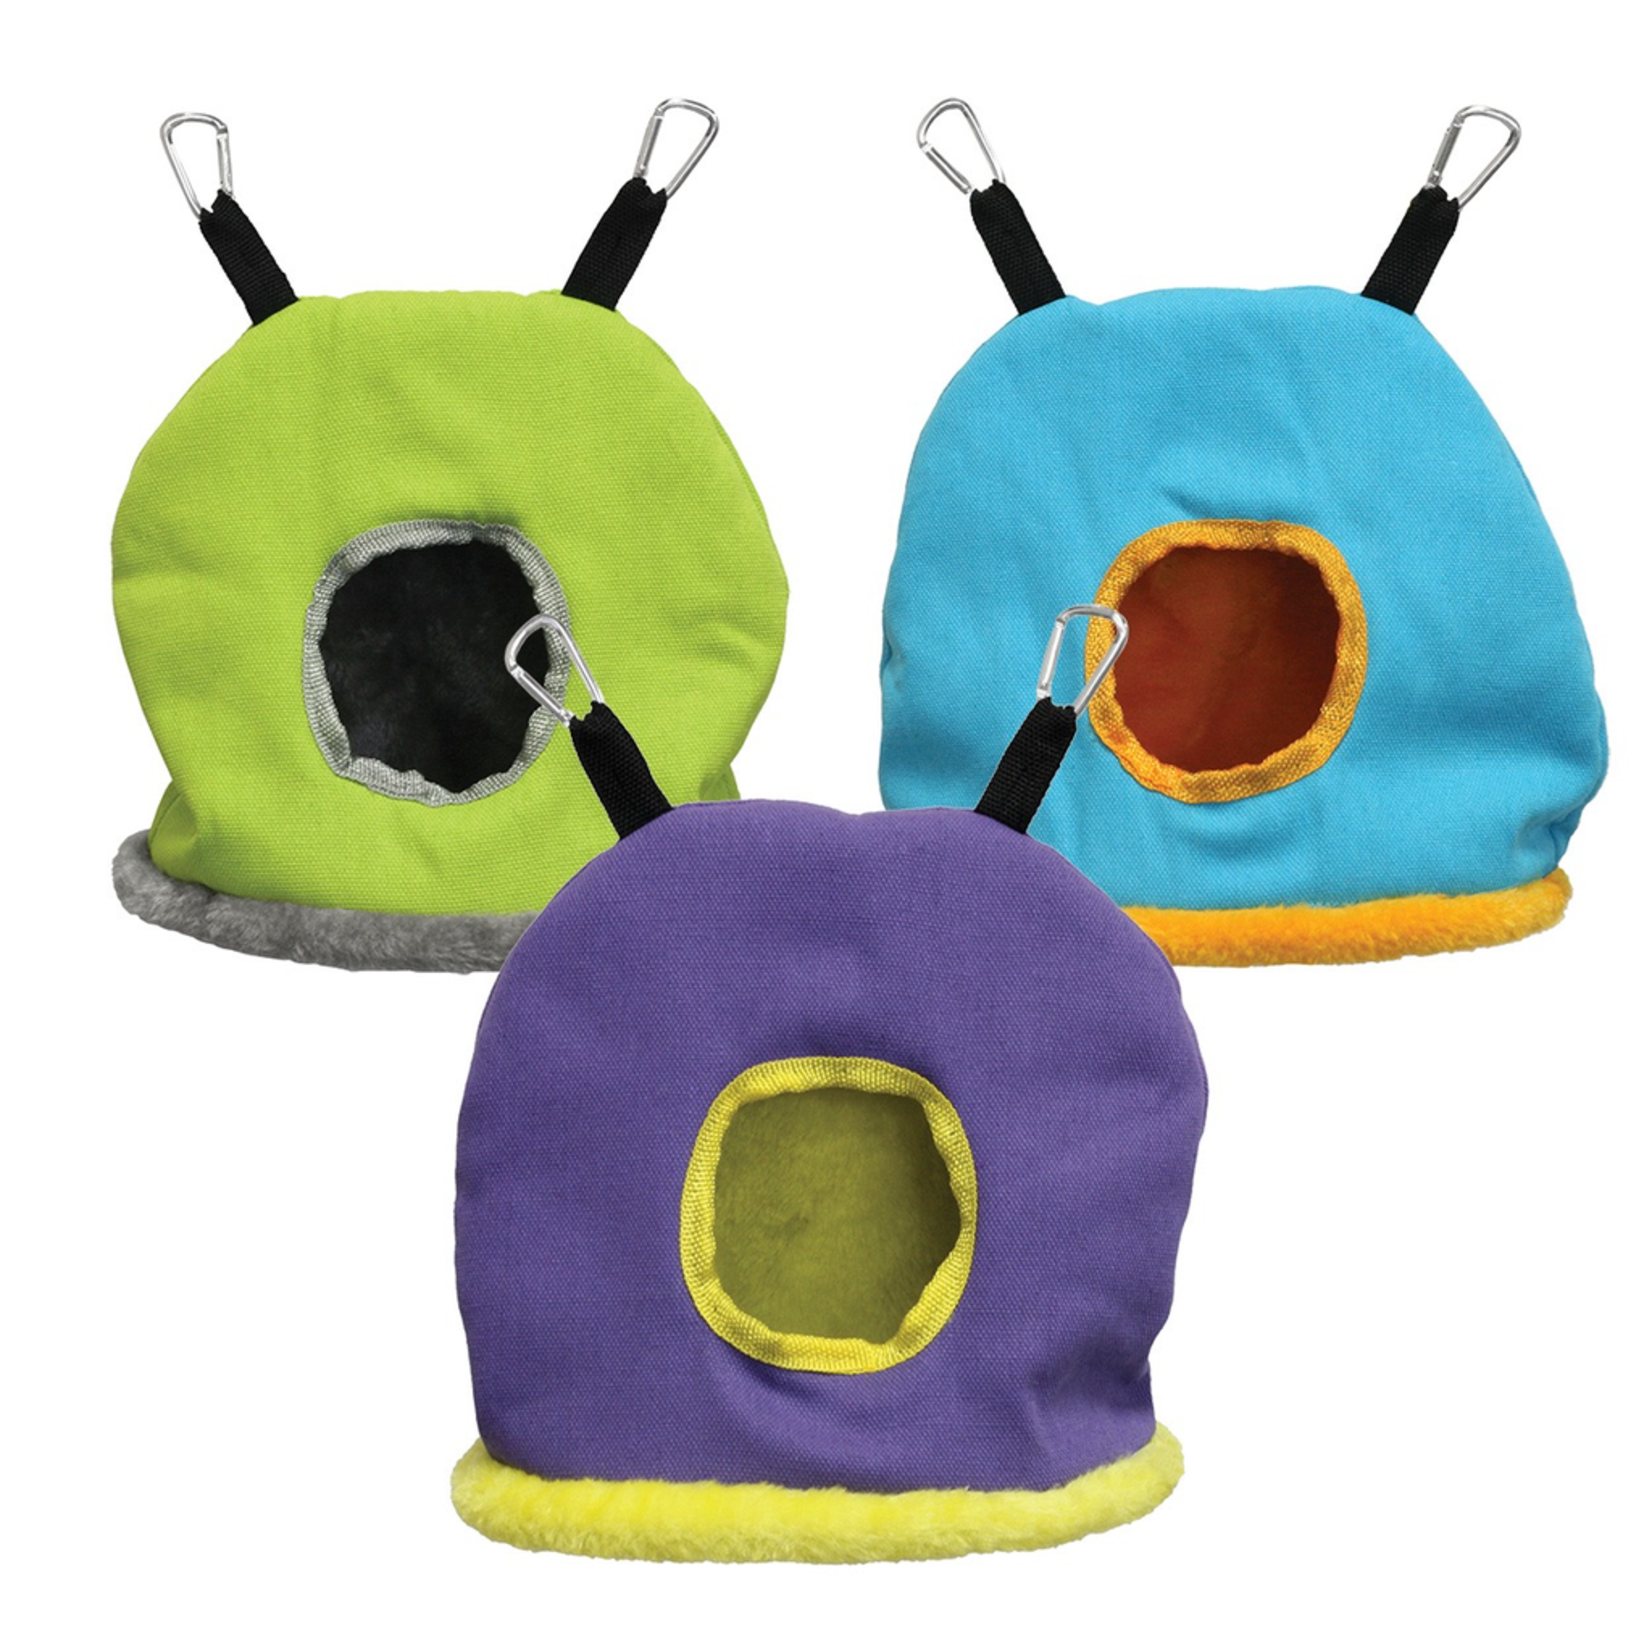 PREVUE PETS Snuggle Sack - Assorted Colors - Large